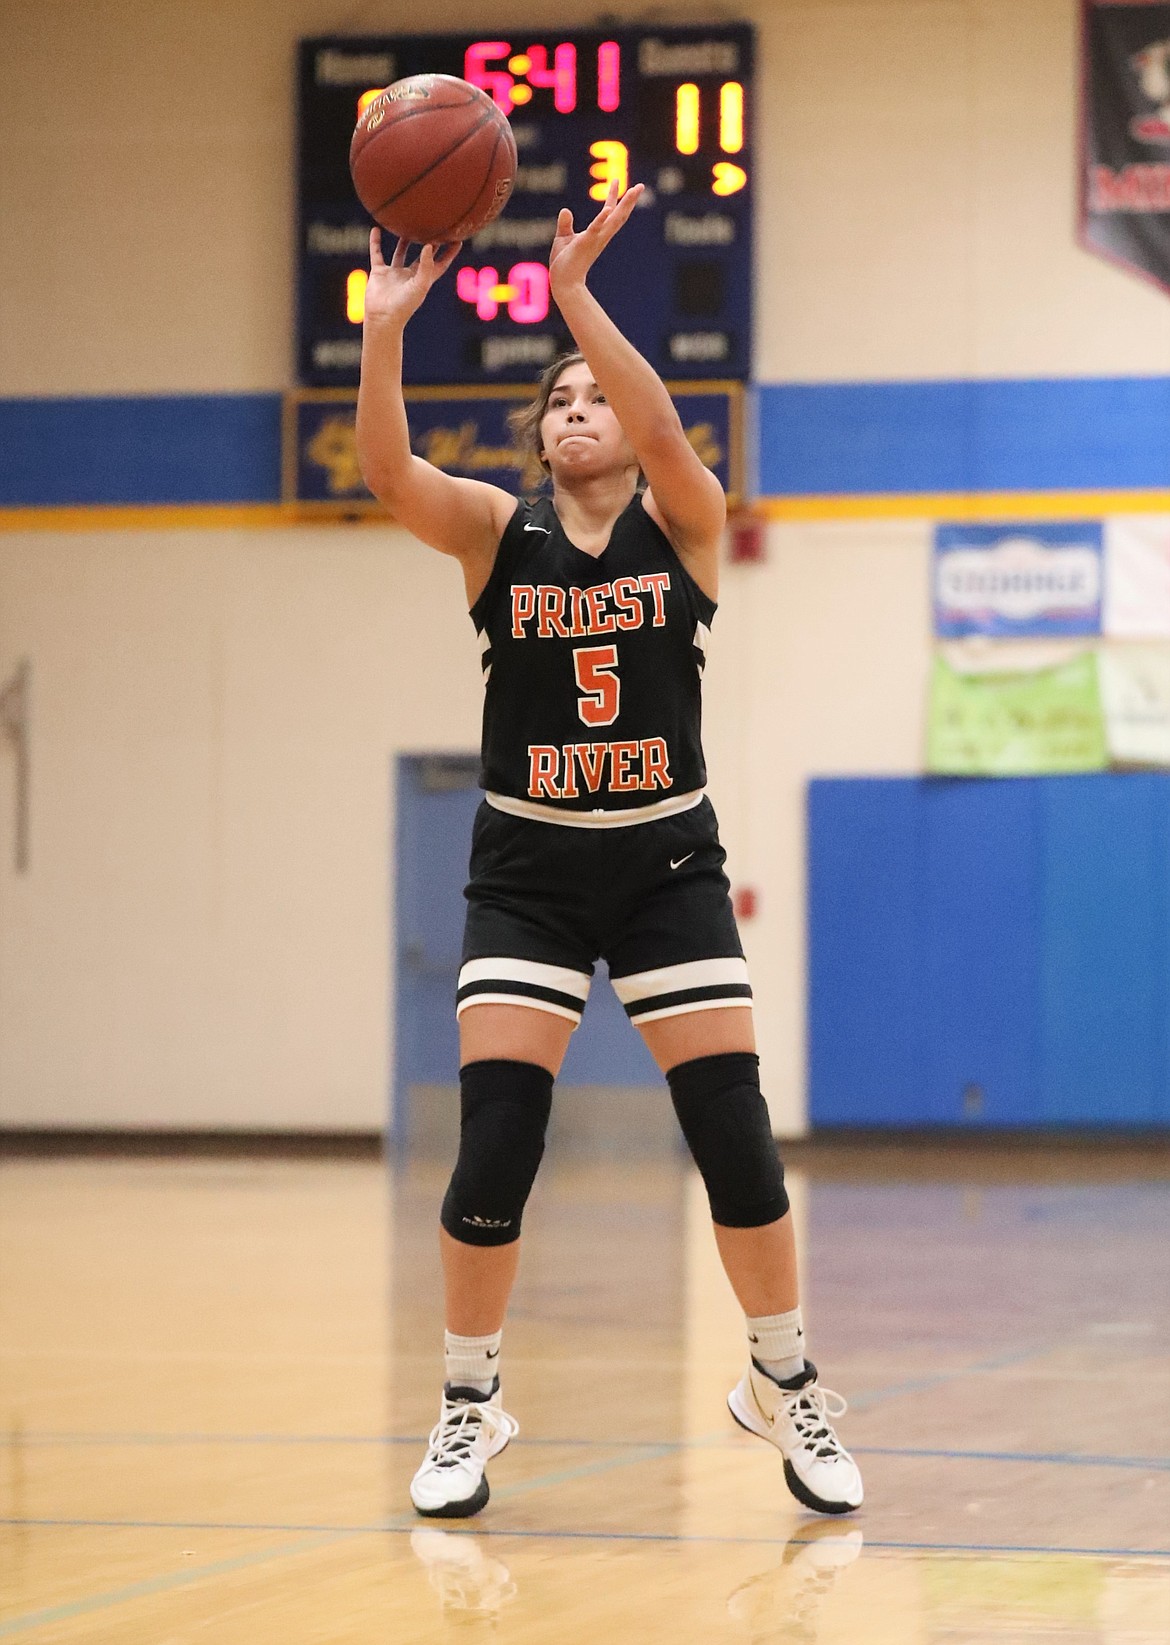 Priest River's Lilly Freitas attempts a free throw.